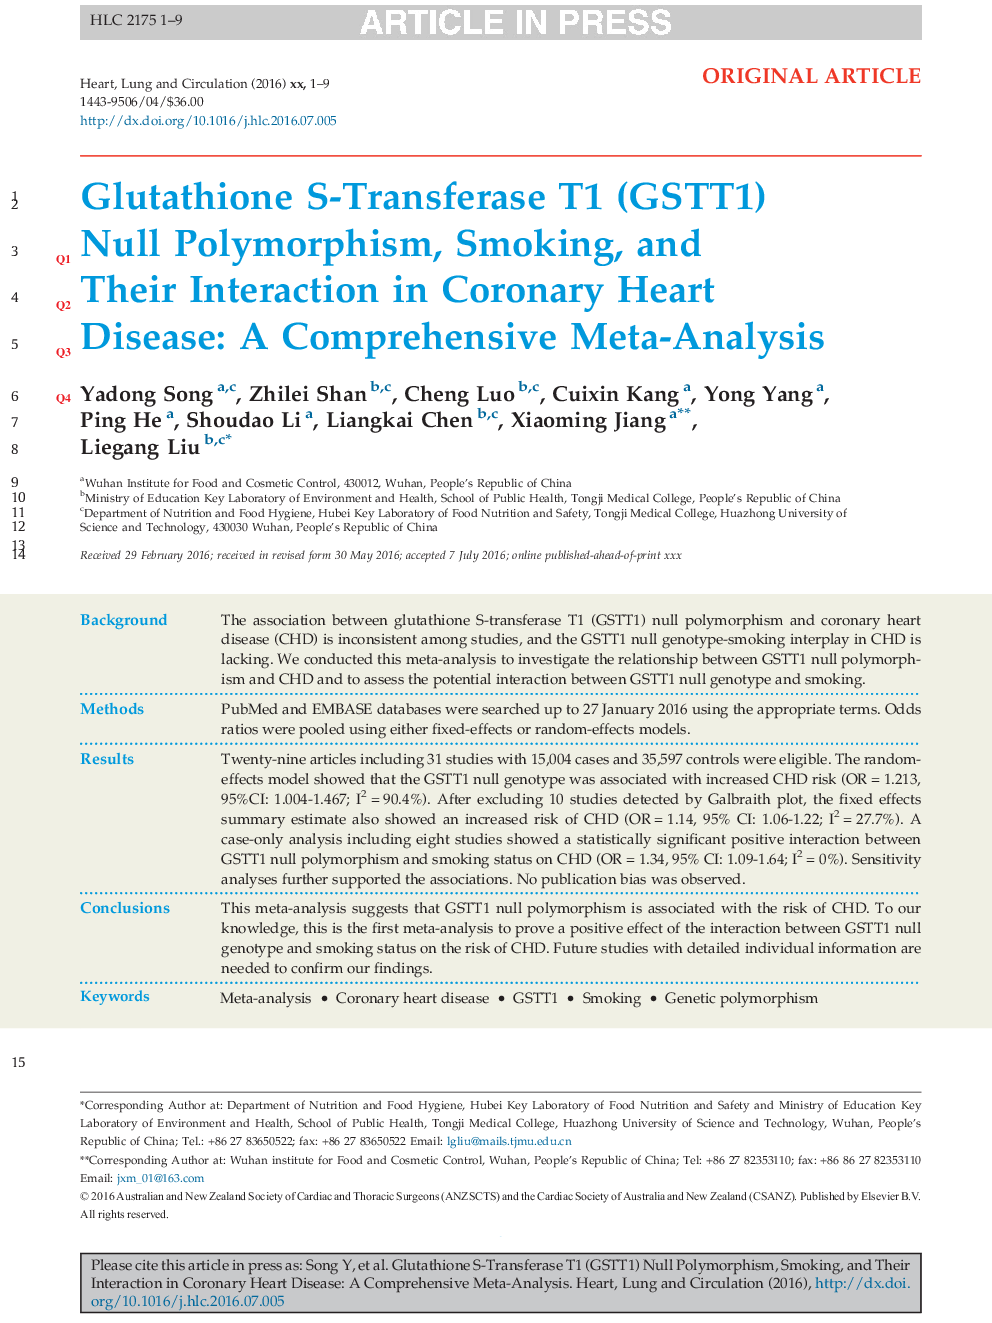 Glutathione S-Transferase T1 (GSTT1) Null Polymorphism, Smoking, and Their Interaction in Coronary Heart Disease: A Comprehensive Meta-Analysis